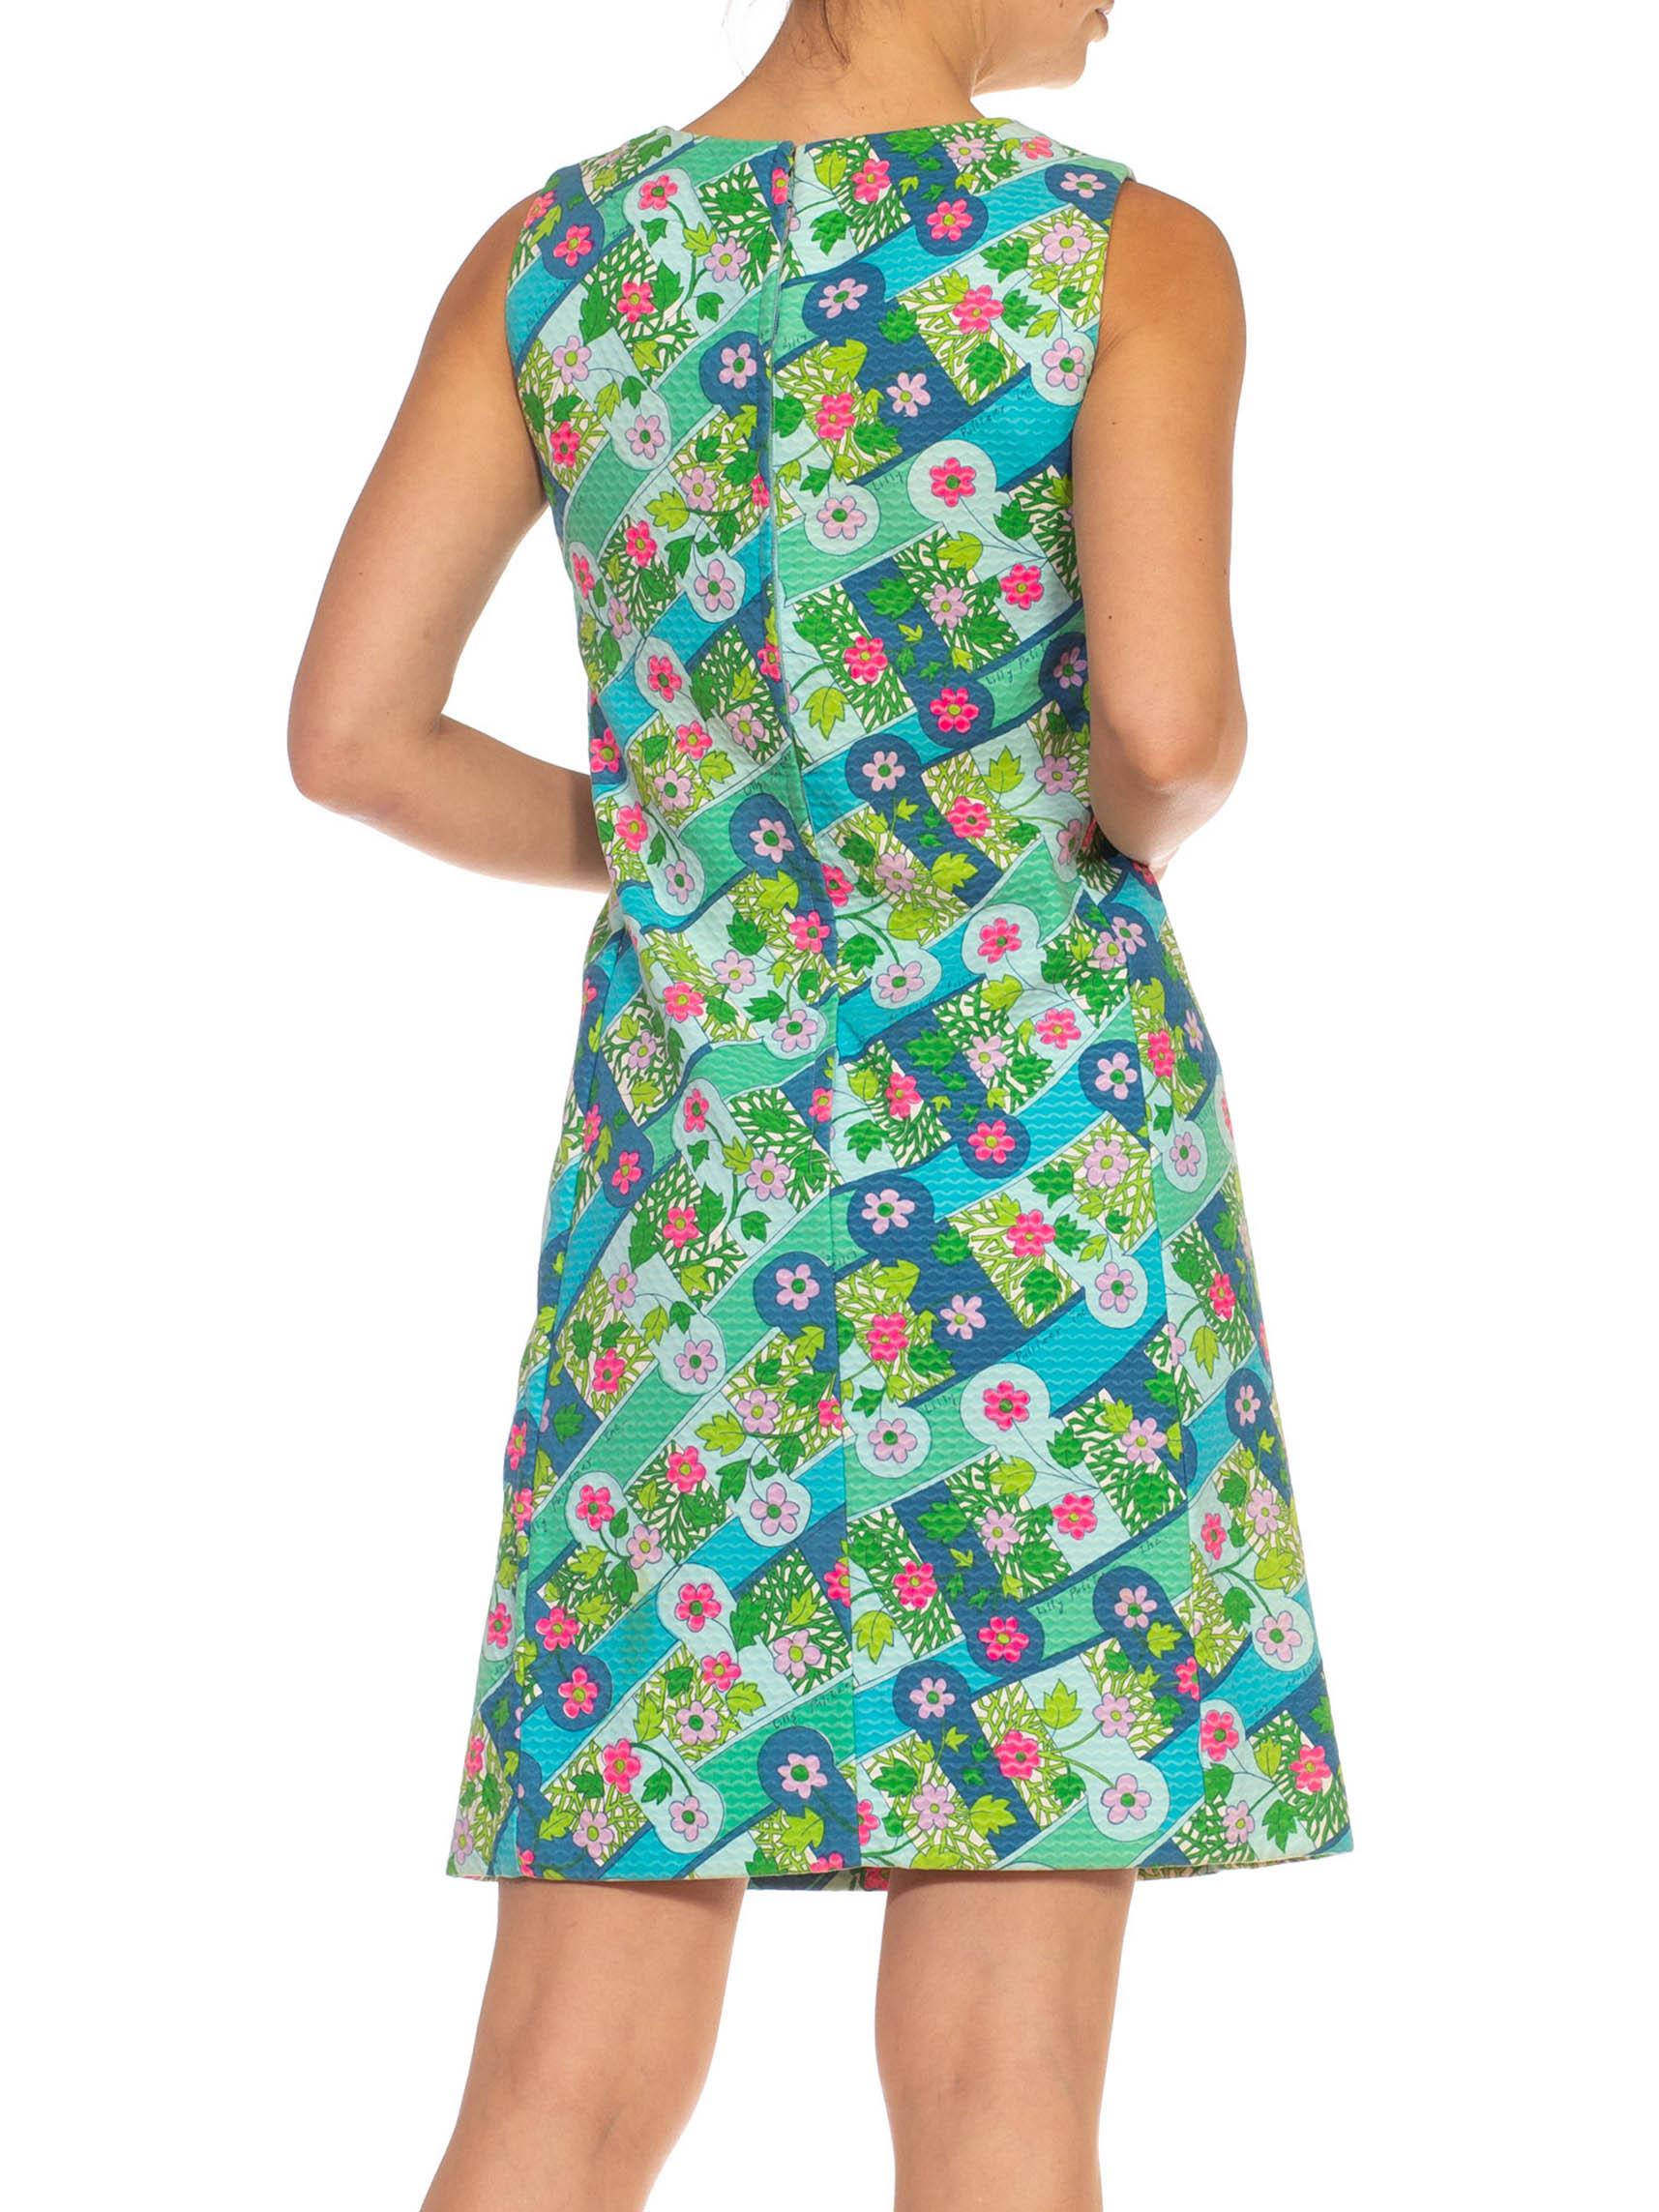 Lilly Pulitzer Psychedelic Geometric Floral Printed Dr, Baumwolle in Blau & Rosa, 1960er Jahre im Angebot 3